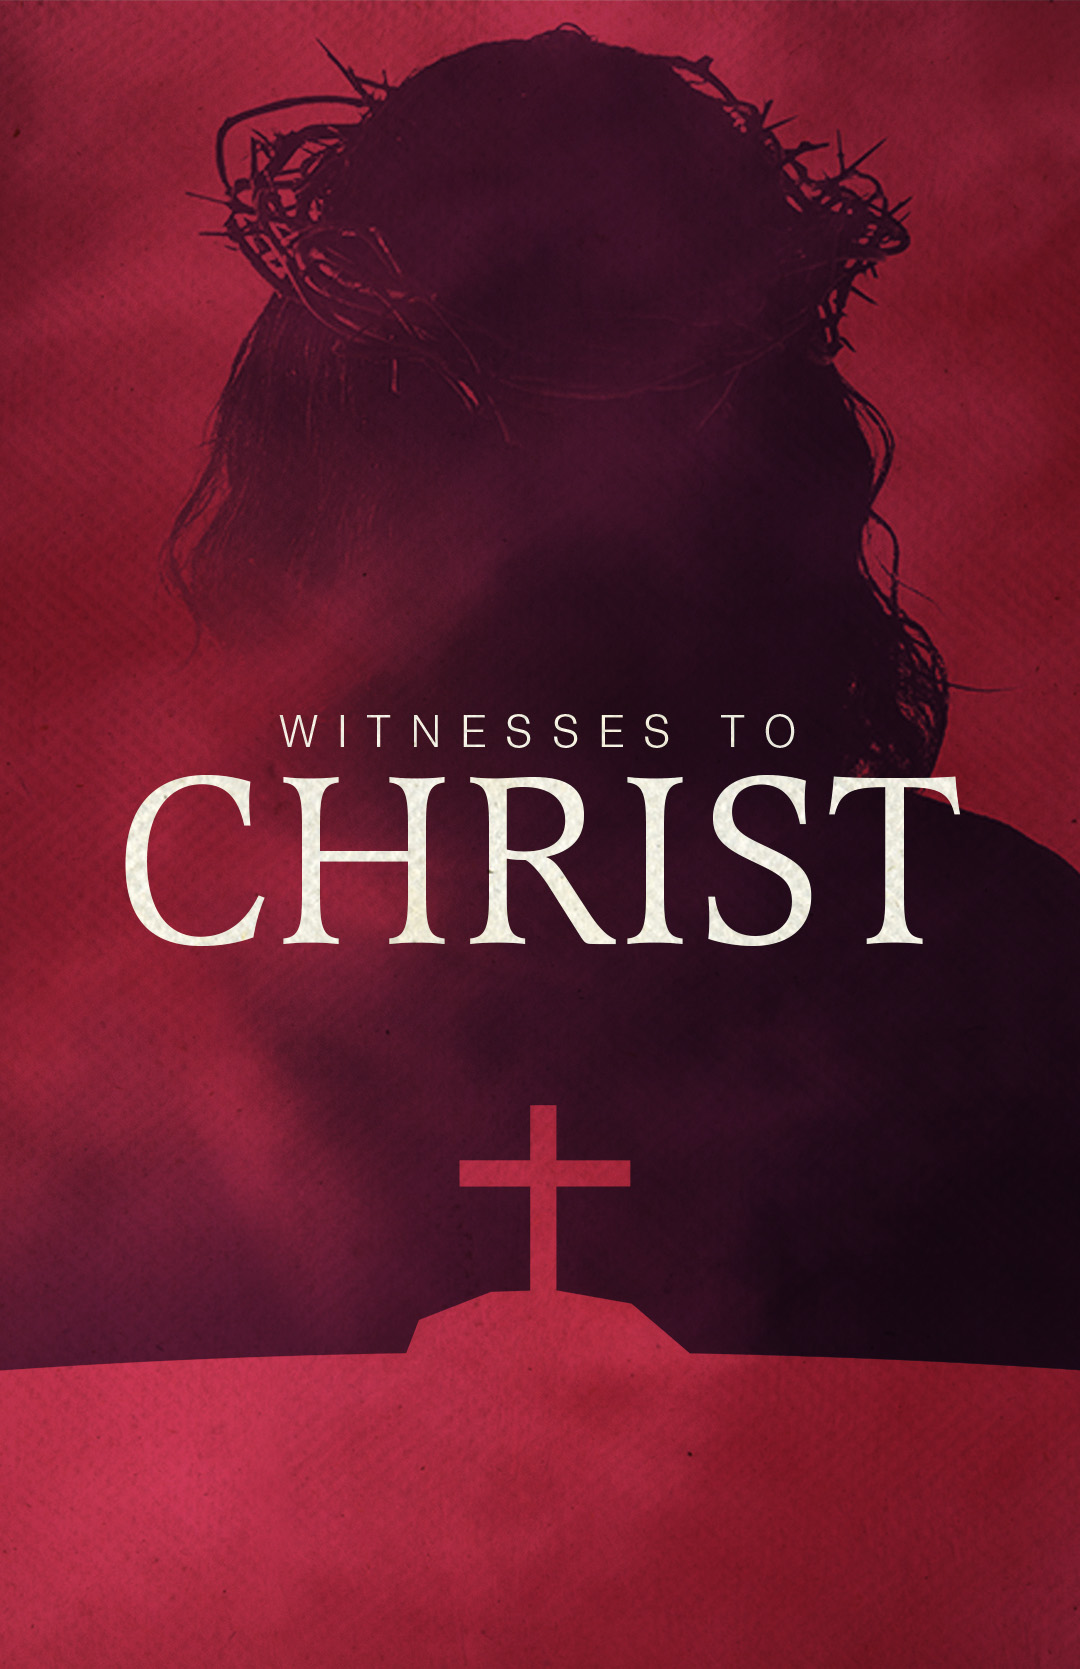 Links to the Witnesses to Christ download